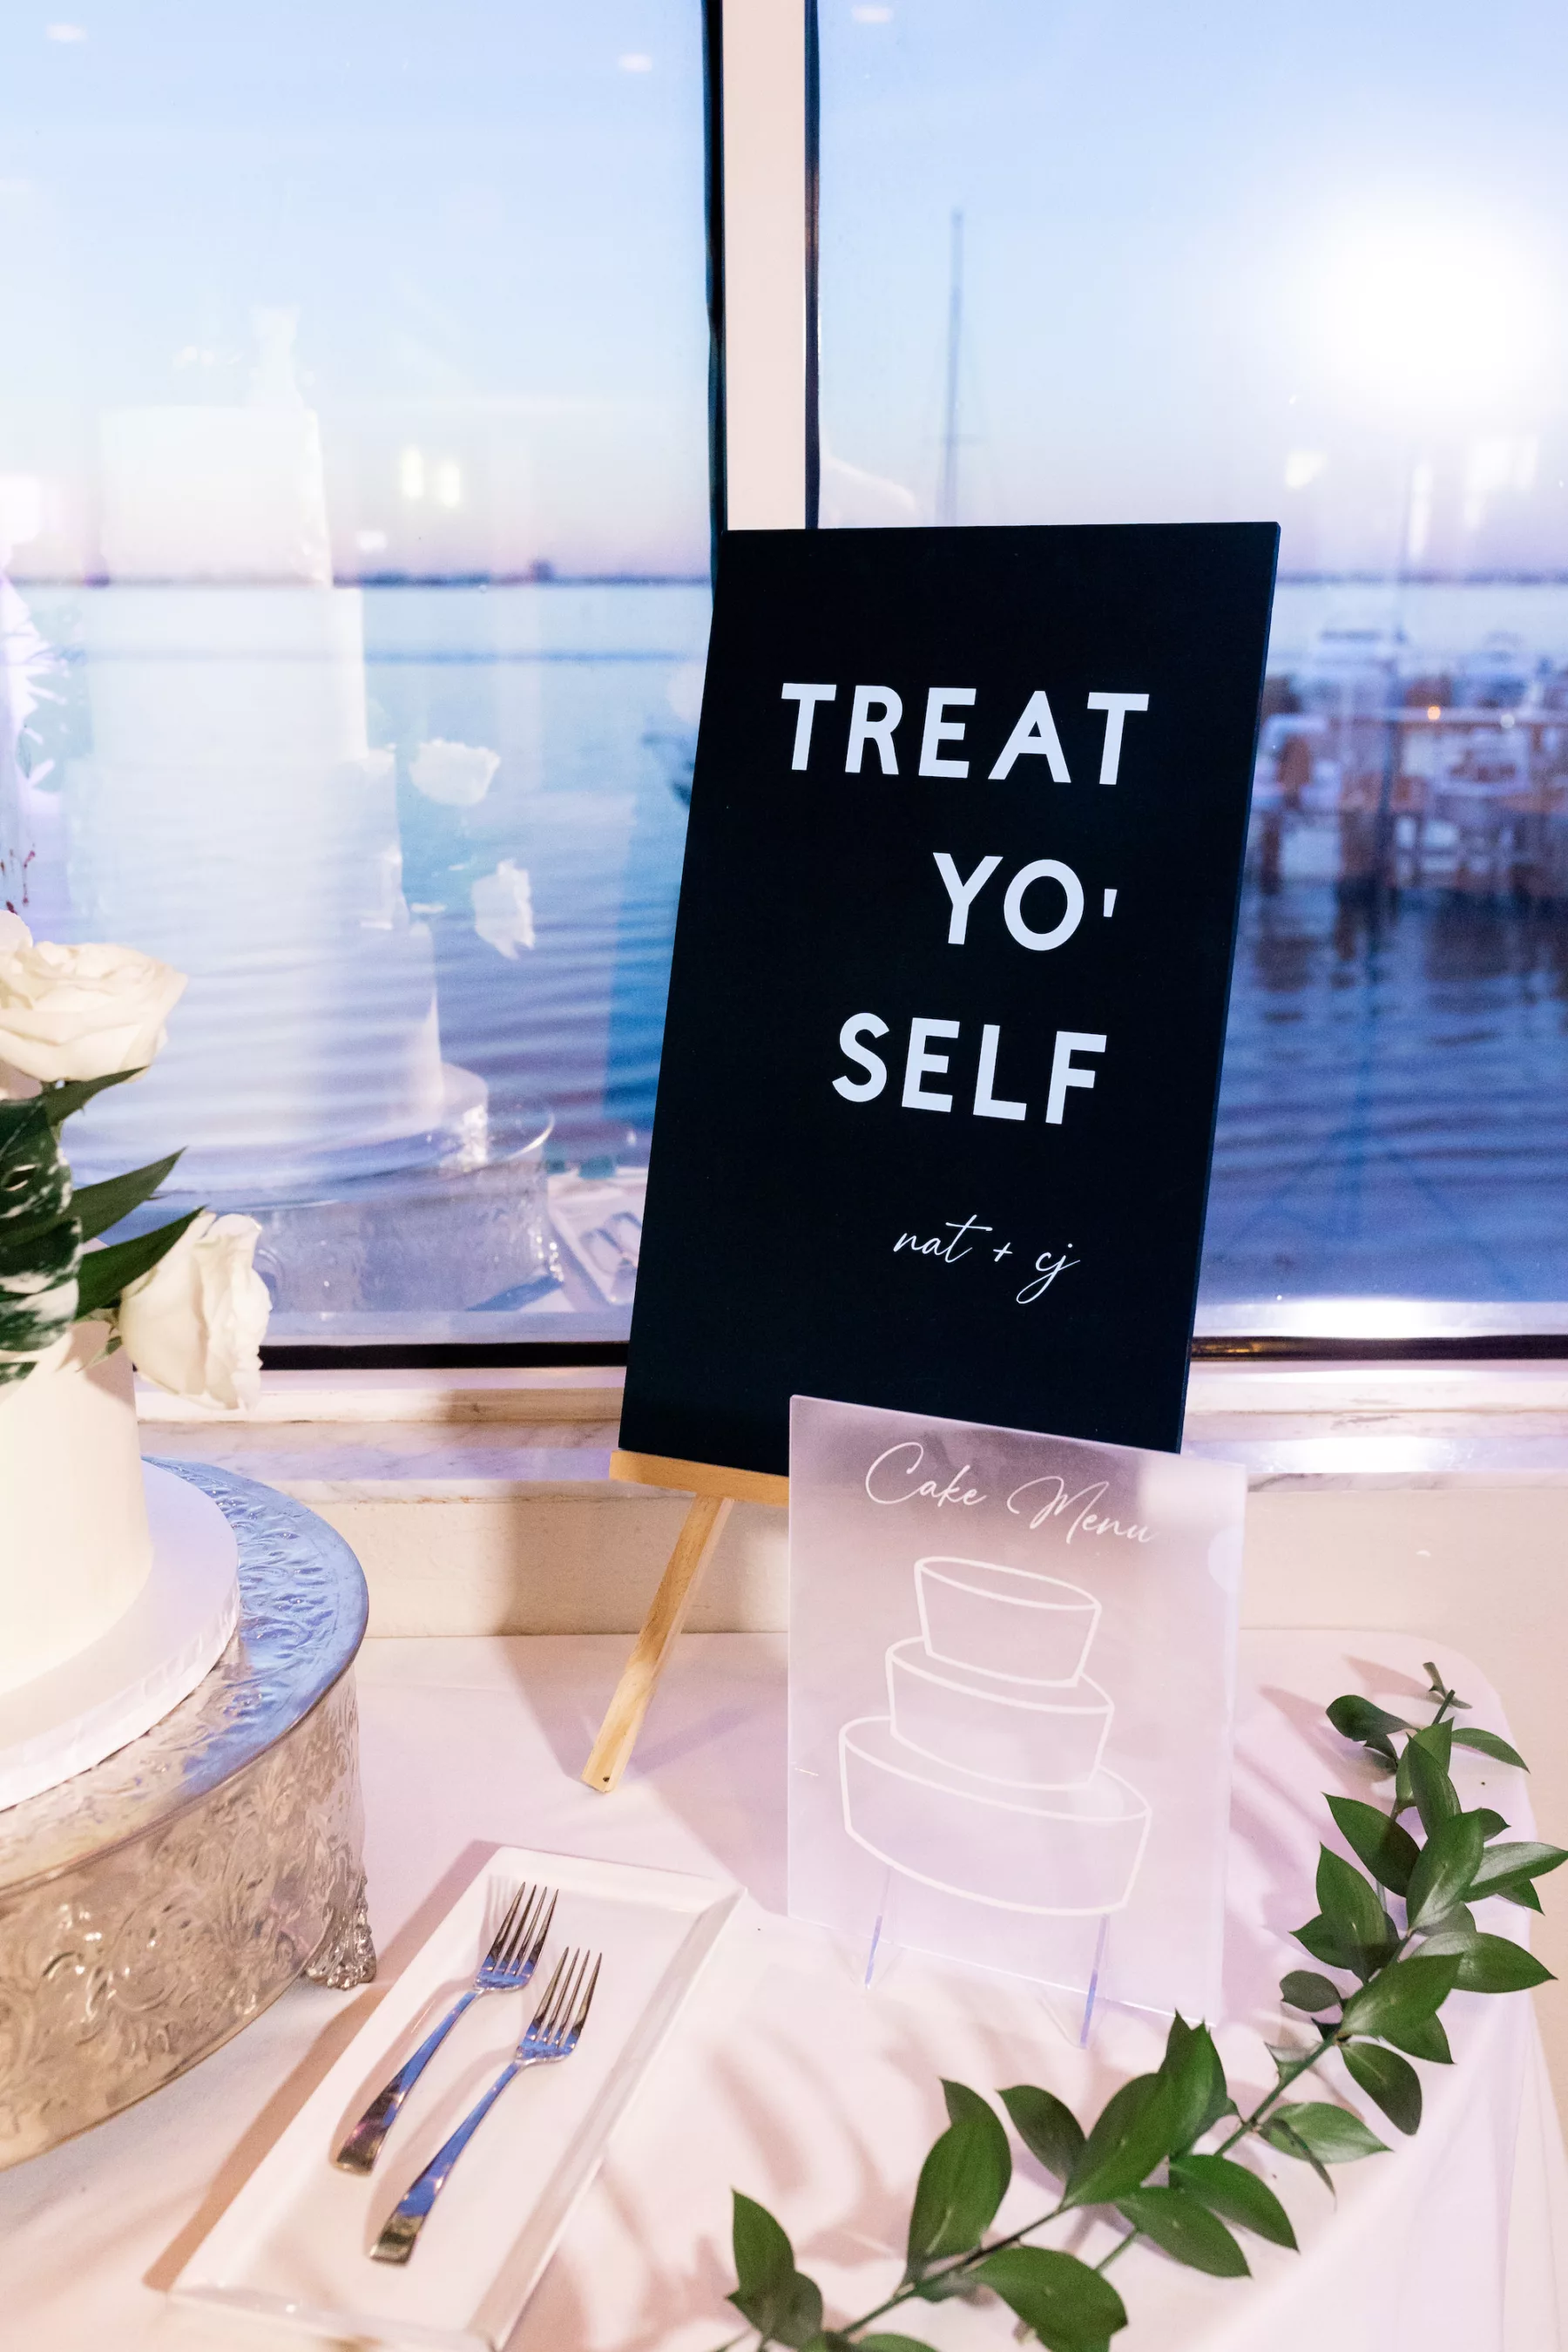 Modern Treat Yo' Self Black and White Sign with Frosted Acrylic Cake Menu Sign | Tropical Wedding Reception Cake Table Decor Ideas